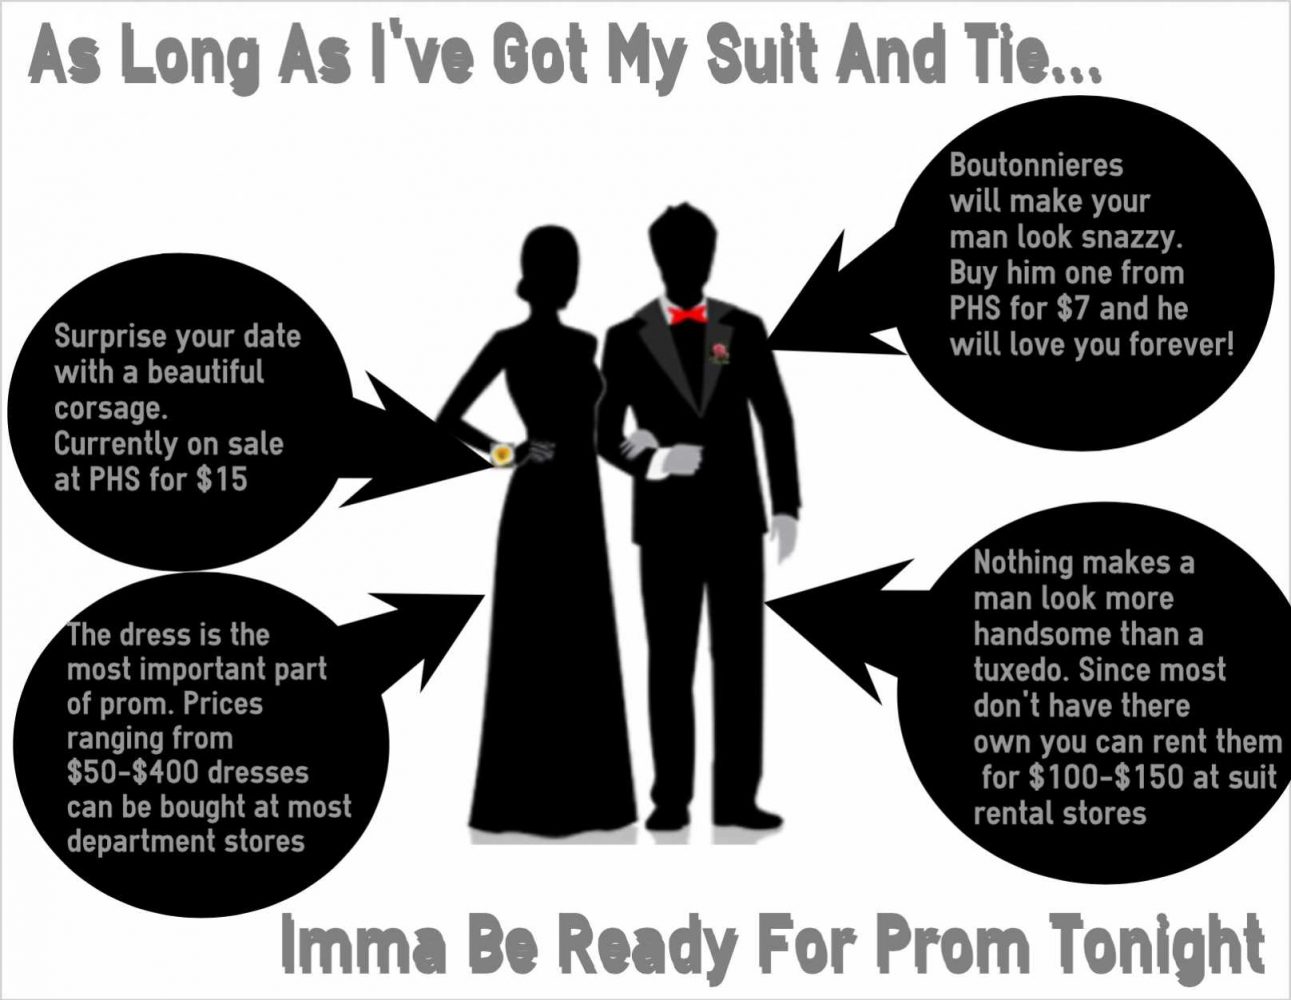 As Long As Ive Got My Suit And Tie, Imma Be Ready For Prom Tonight!